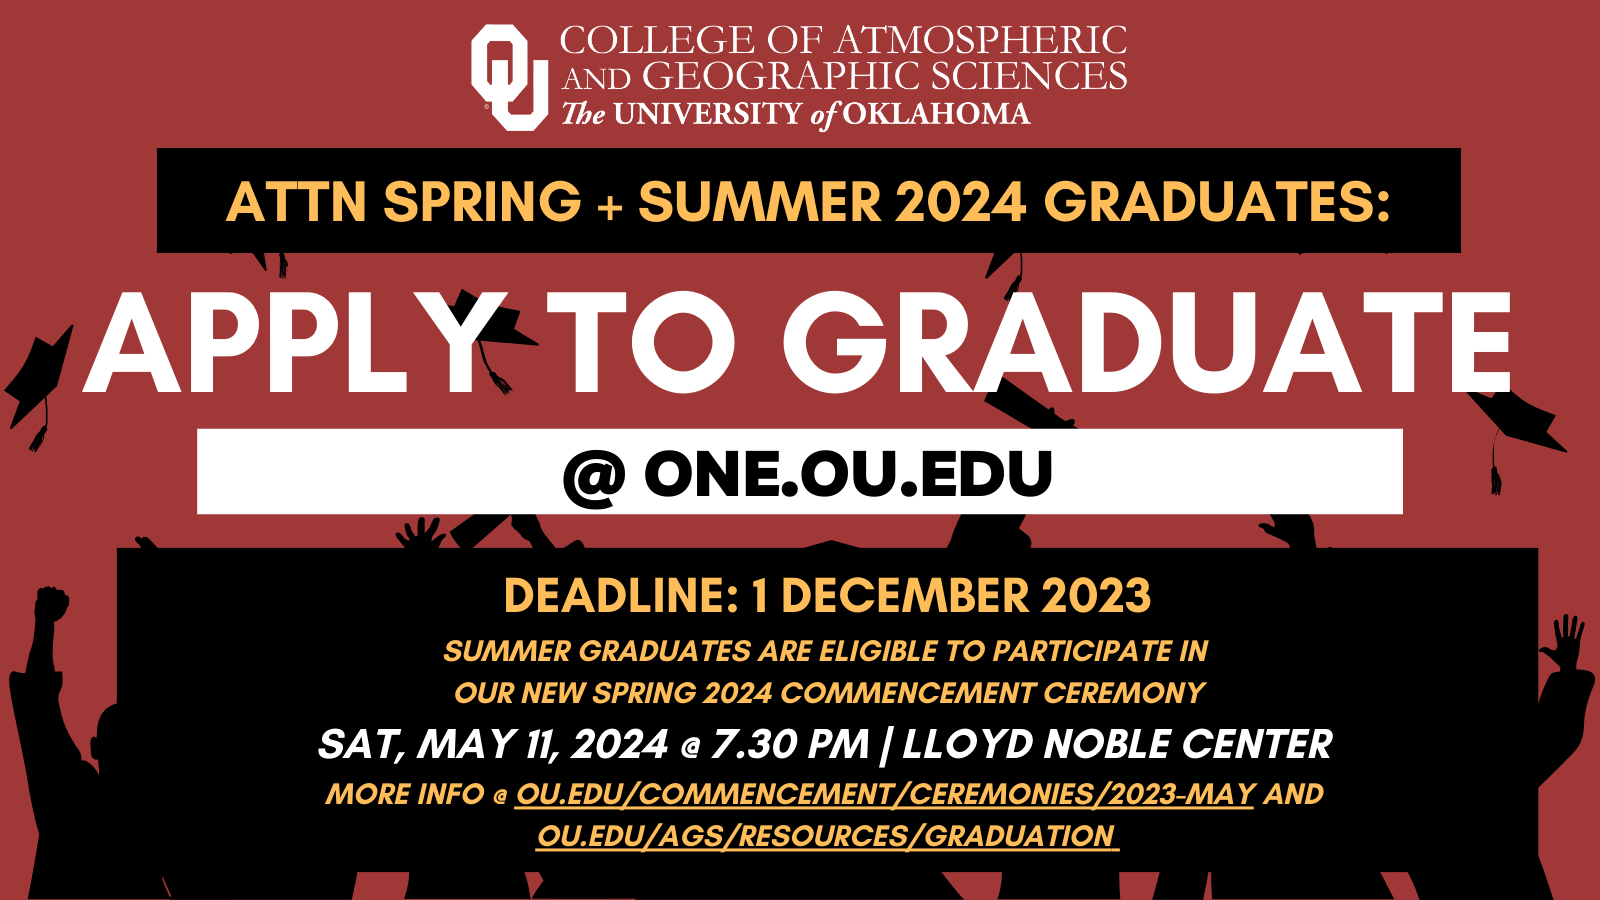 Deadline to apply for graduation is december 1, 2023. Spring 2024 convocation will be on Saturday, May 11th at 7:30 PM at the Lloyd Noble Center